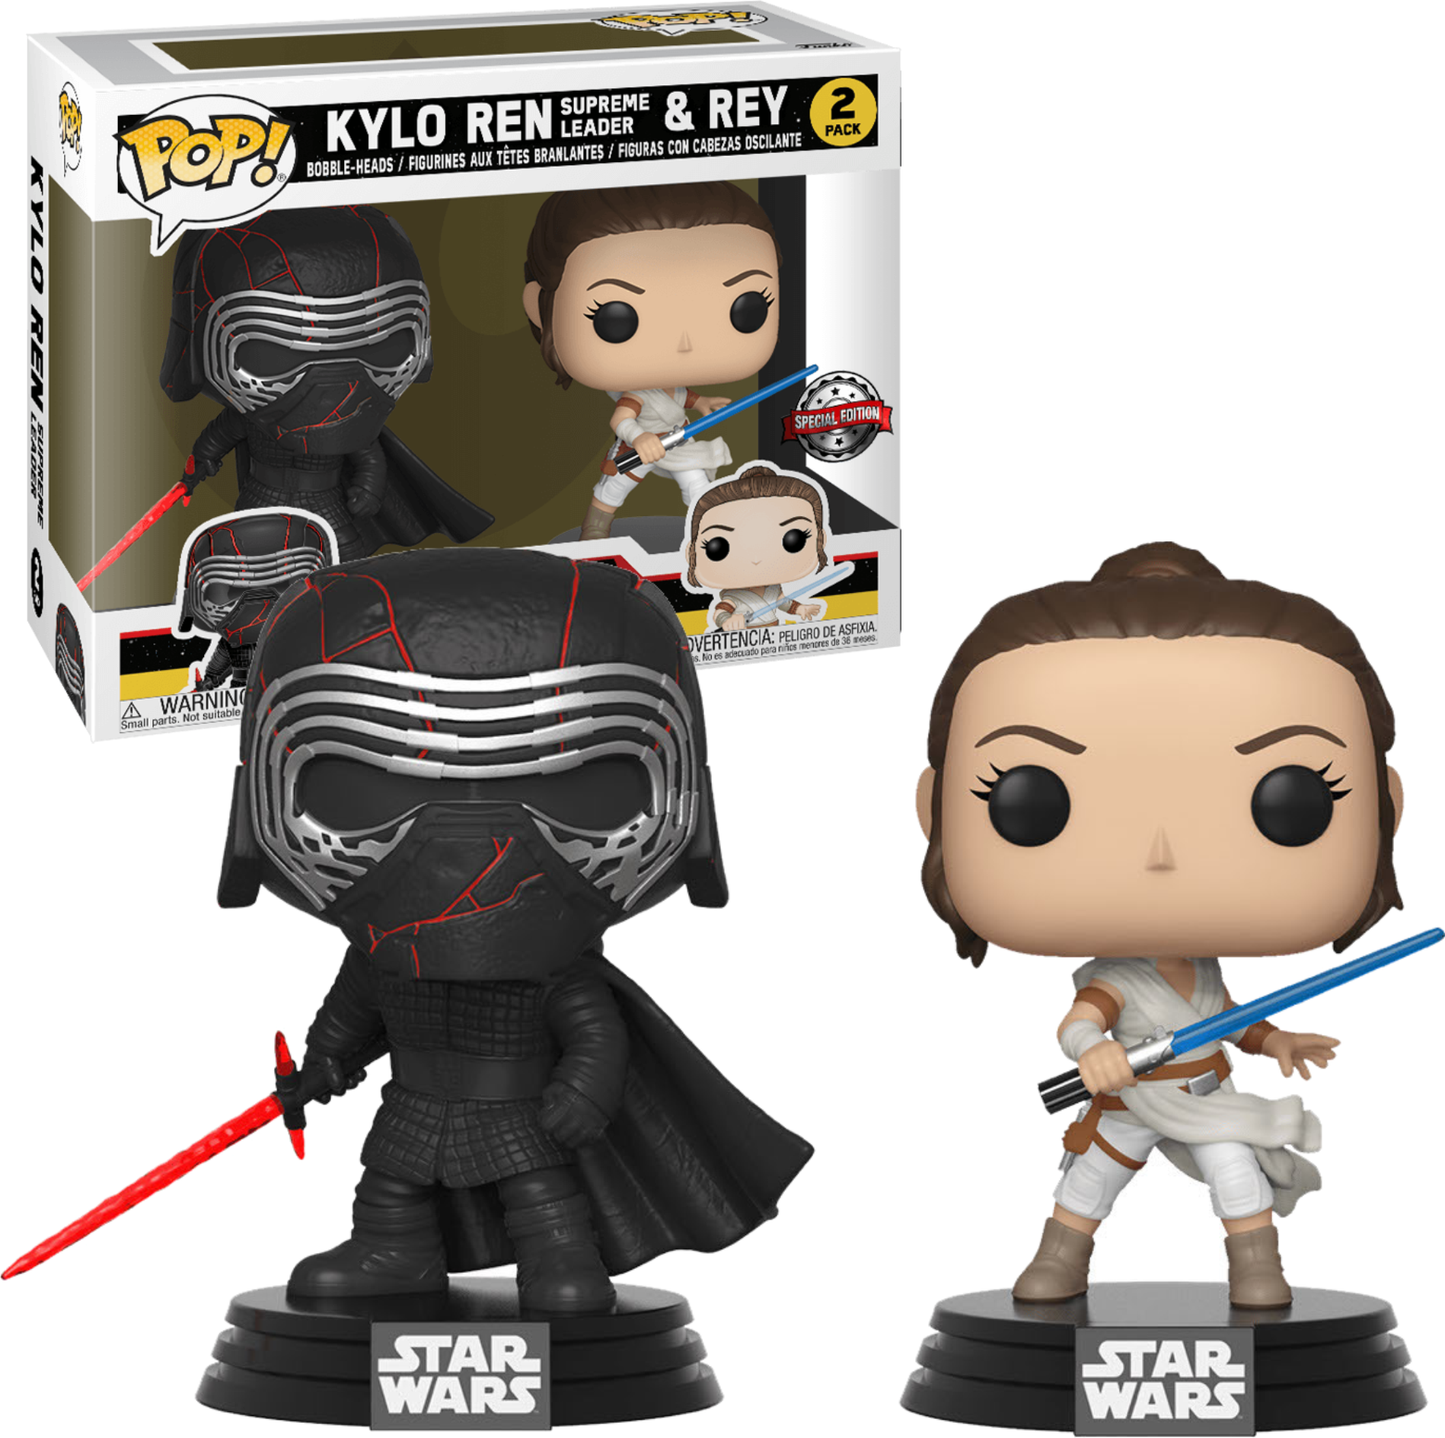 Kylo Ren and Rey - Star Wars - Rise of Skywalker Special Edition 2 Pack